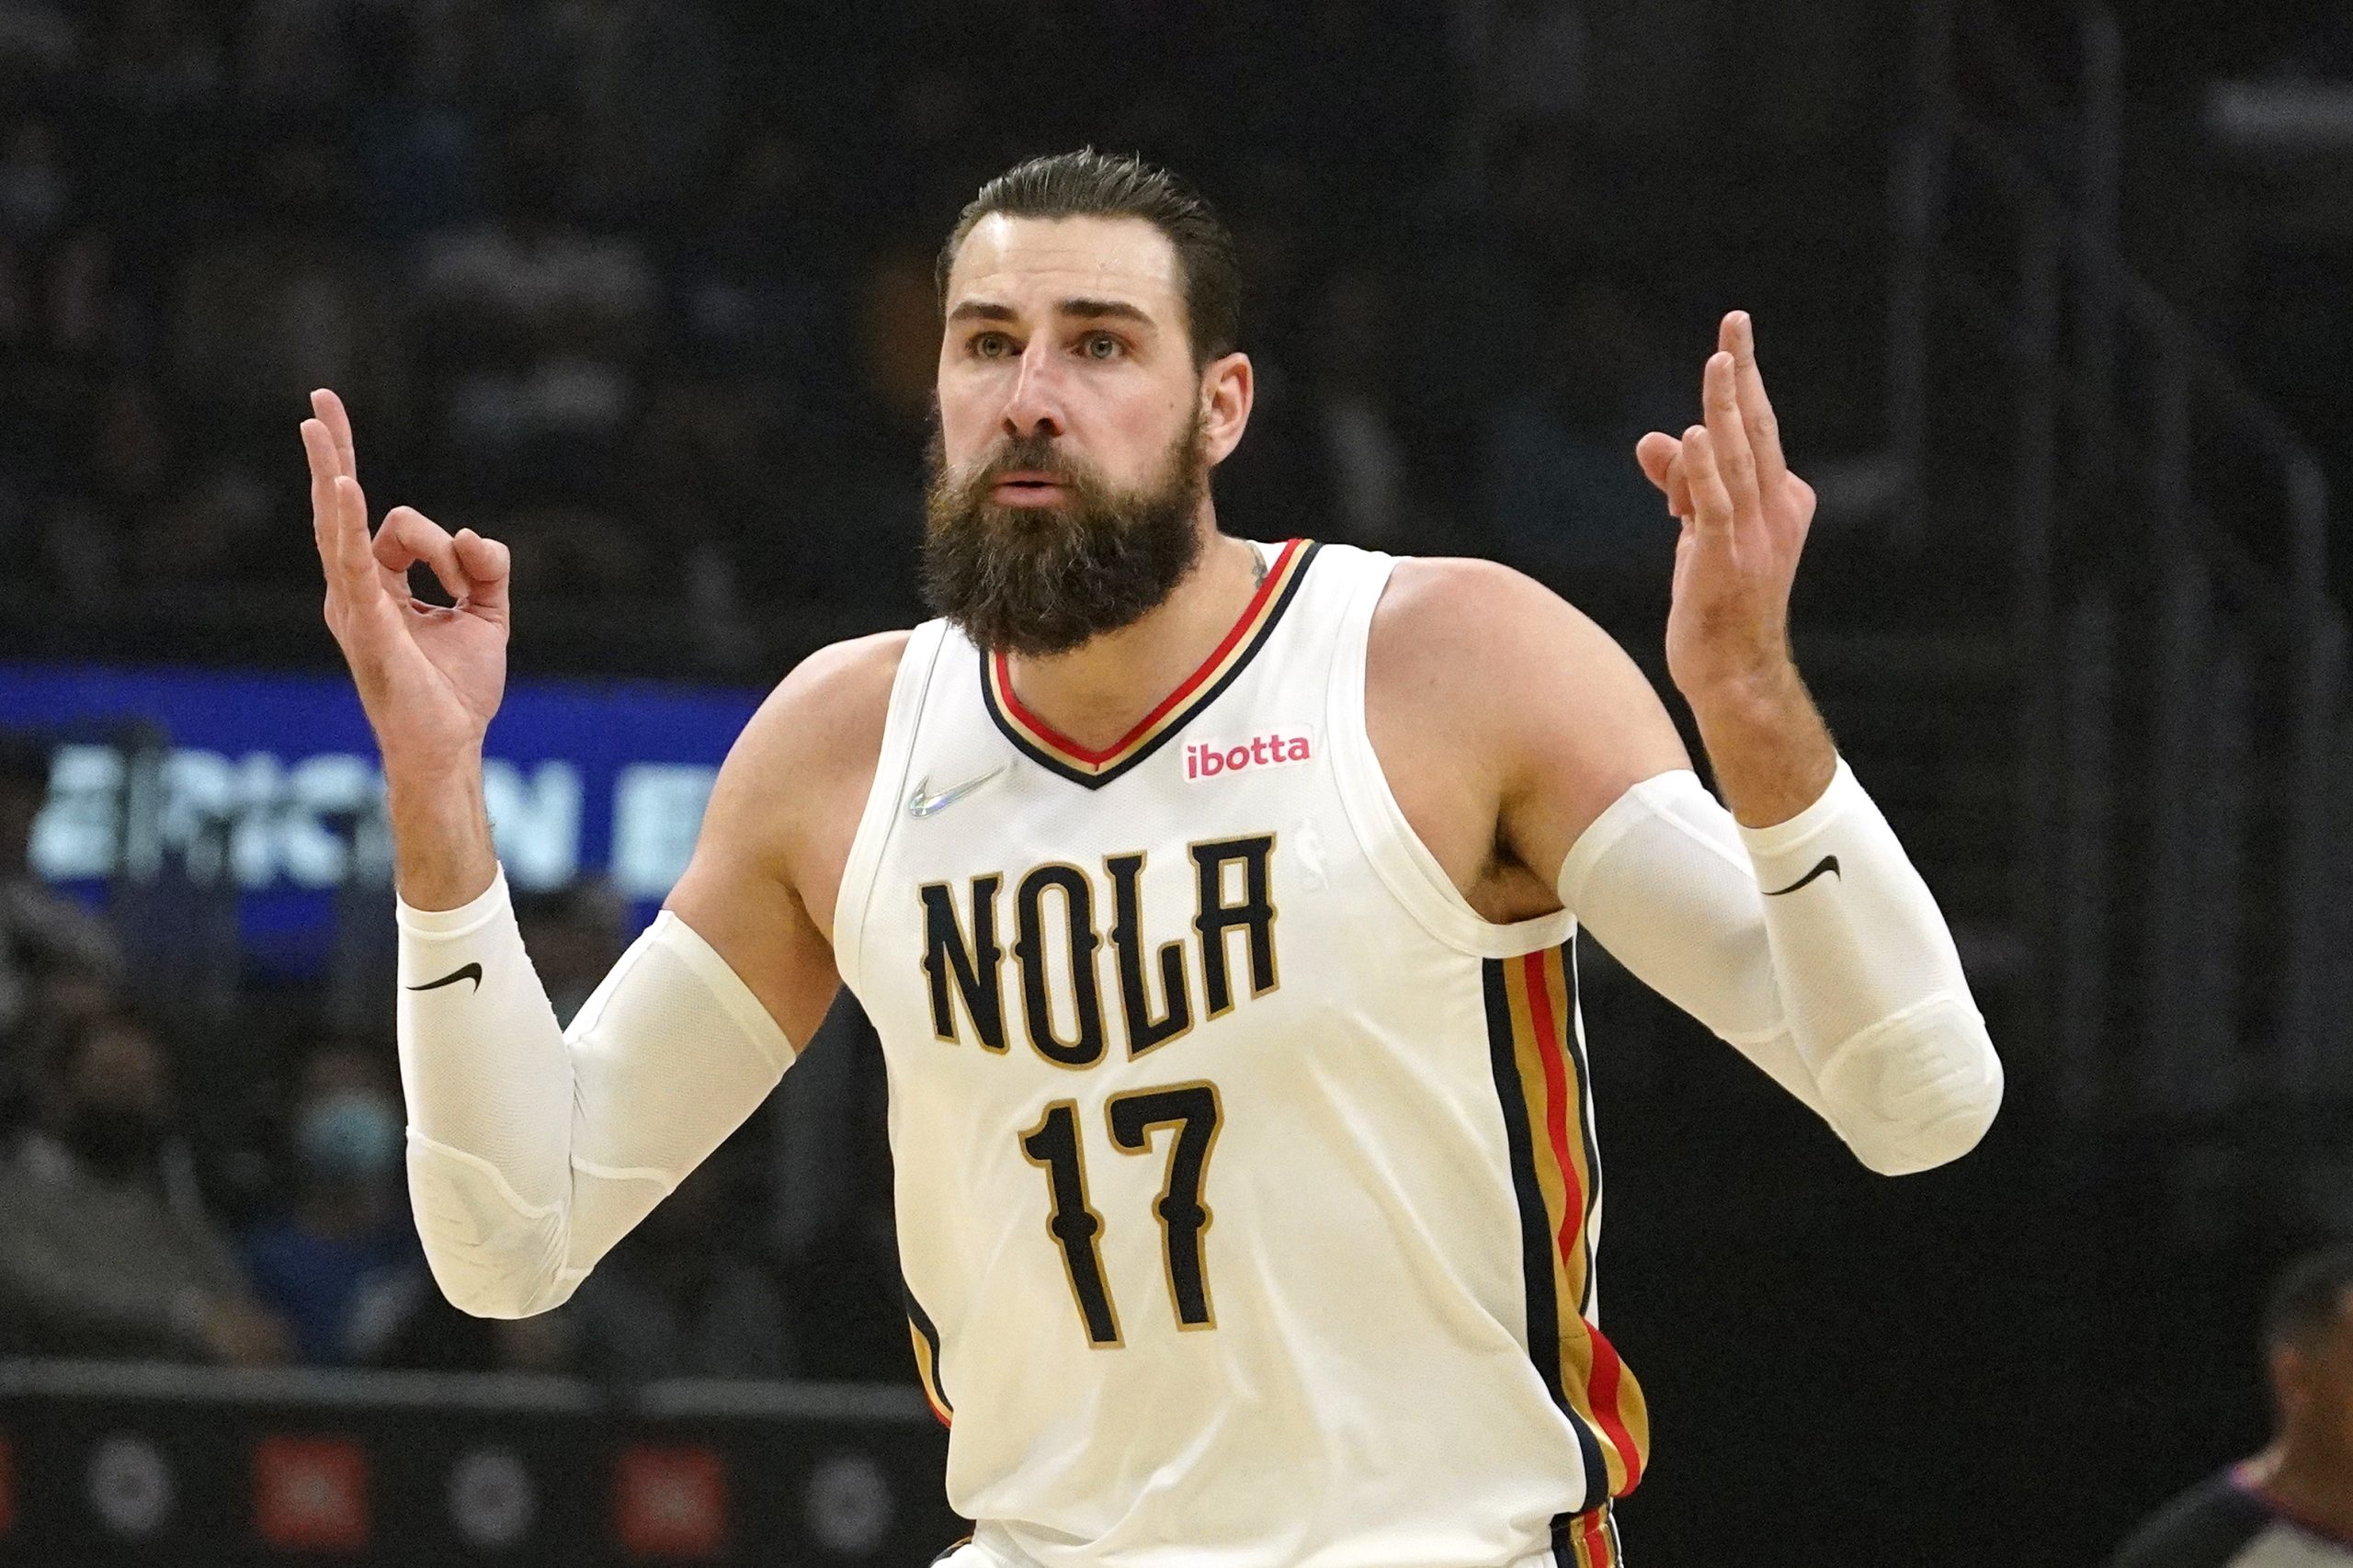 New Orleans Pelicans center Jonas Valanciunas celebrates after scoring during the first half of an NBA basketball game against the Los Angeles Clippers Monday, Nov. 29, 2021, in Los Angeles. (AP Photo/Mark J. Terrill)